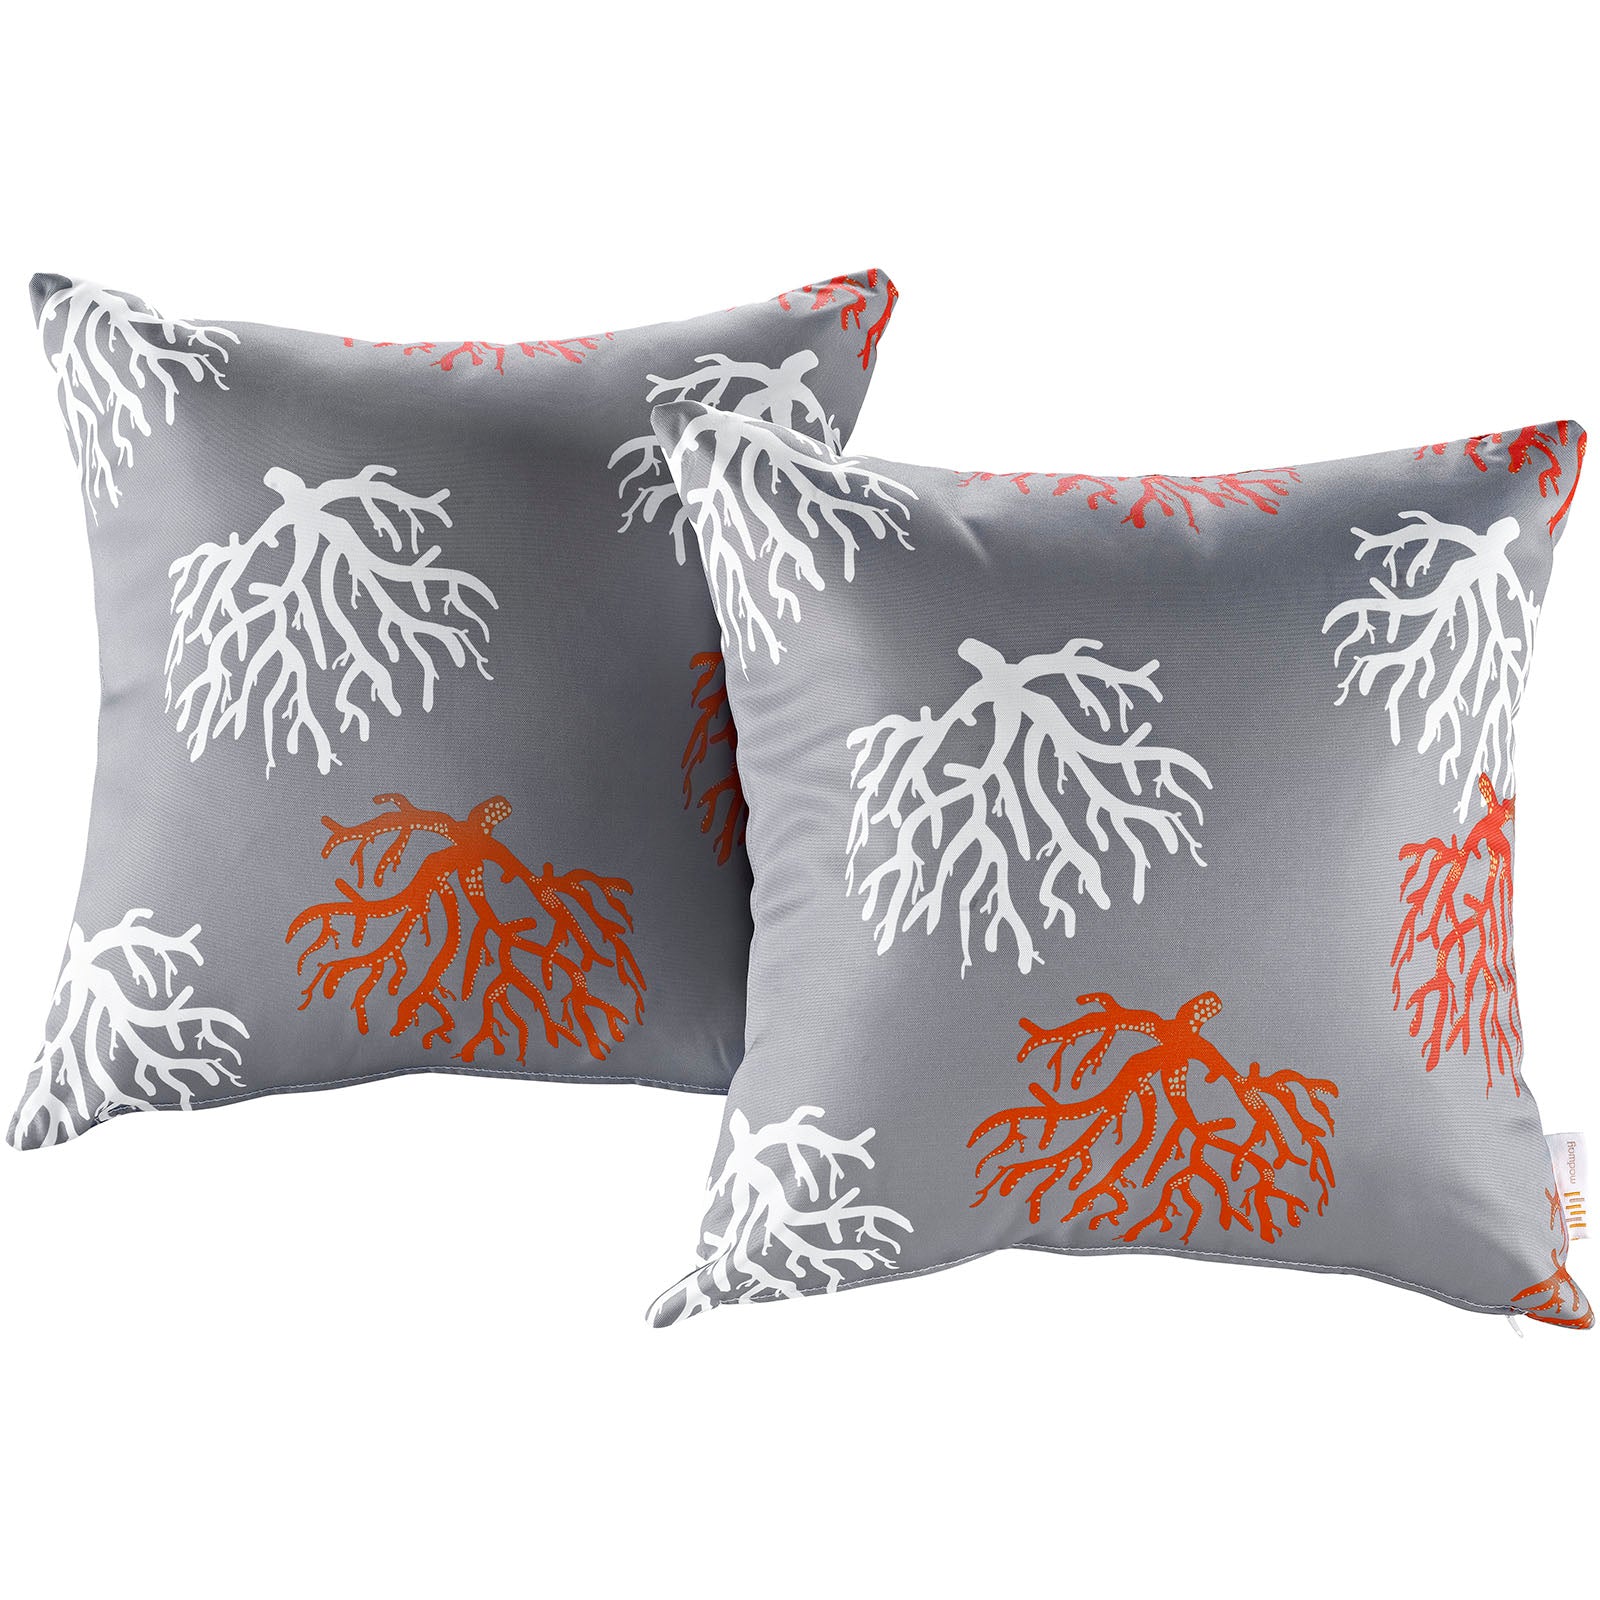 Modway Outdoor Pillows & Cushions - Modway Two Piece Outdoor Patio Pillow Set Orchard